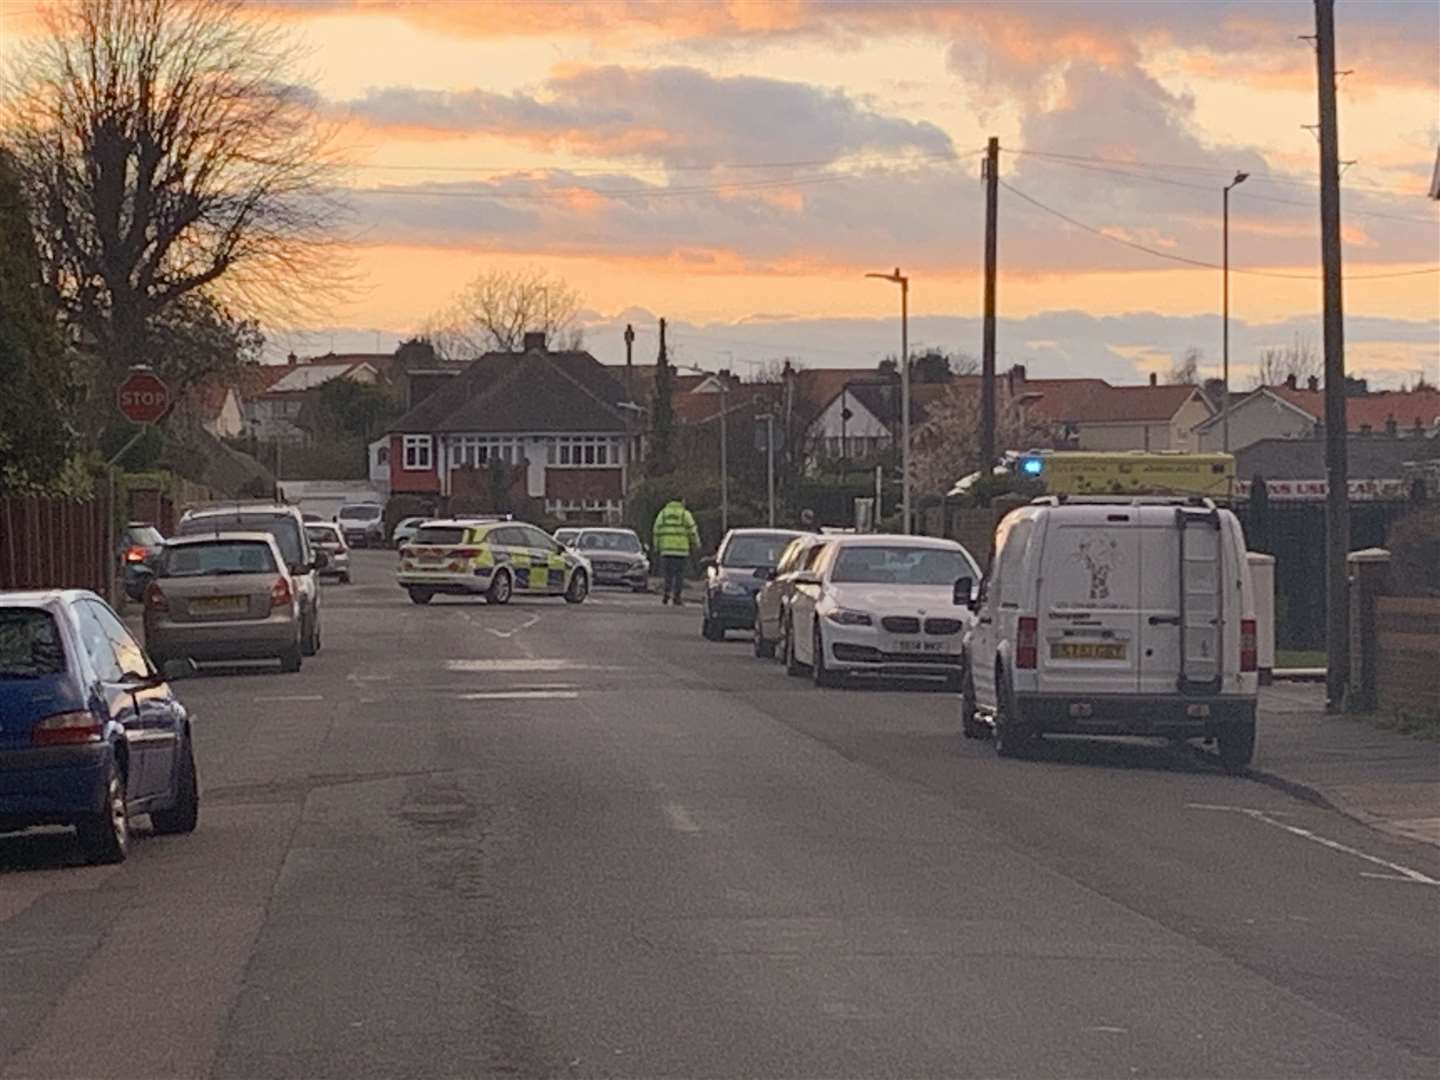 Police at the scene of the biker crash on the A258 Dover Road in April 2020